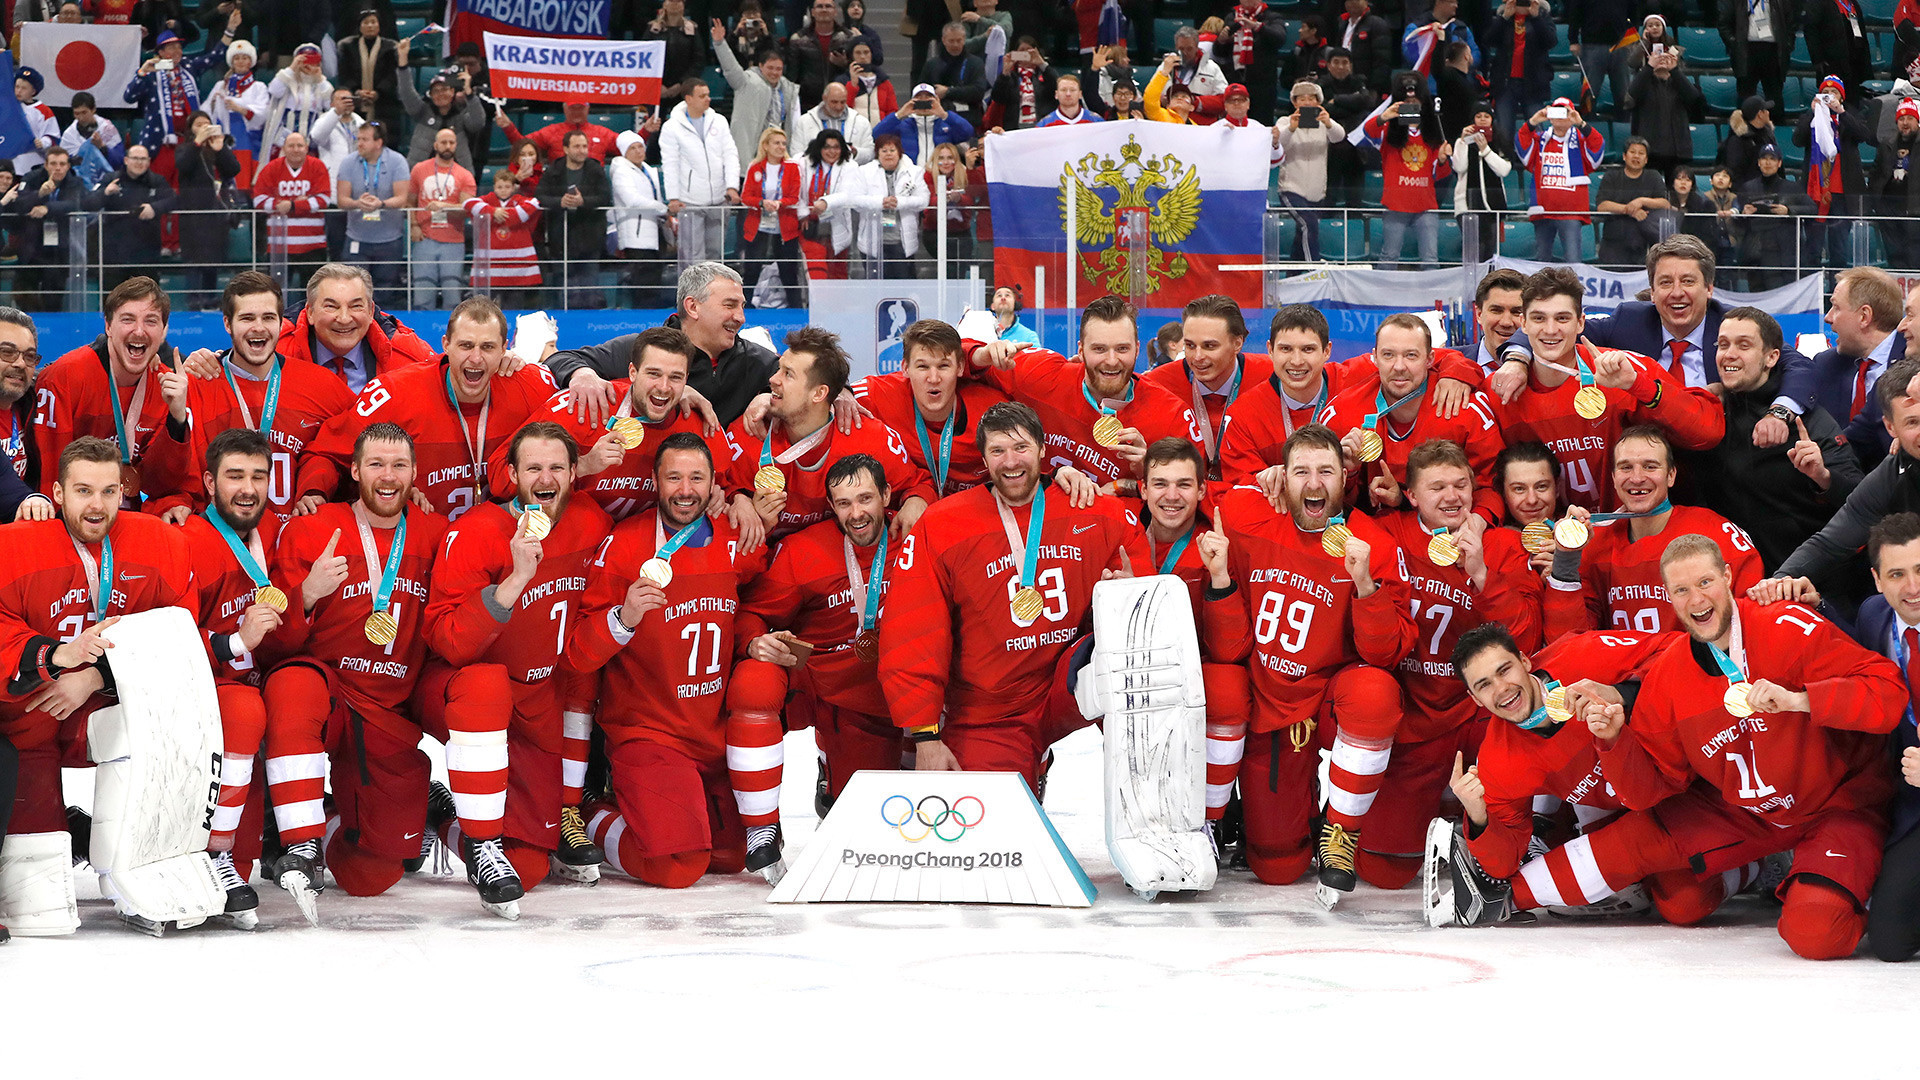 Russian athletes were forced to compete as Olympic Athletes from Russia at Pyeongchang 2018 but the suspension was lifted a few days after its ice hockey team had won the Olympic gold medal ©Getty Images